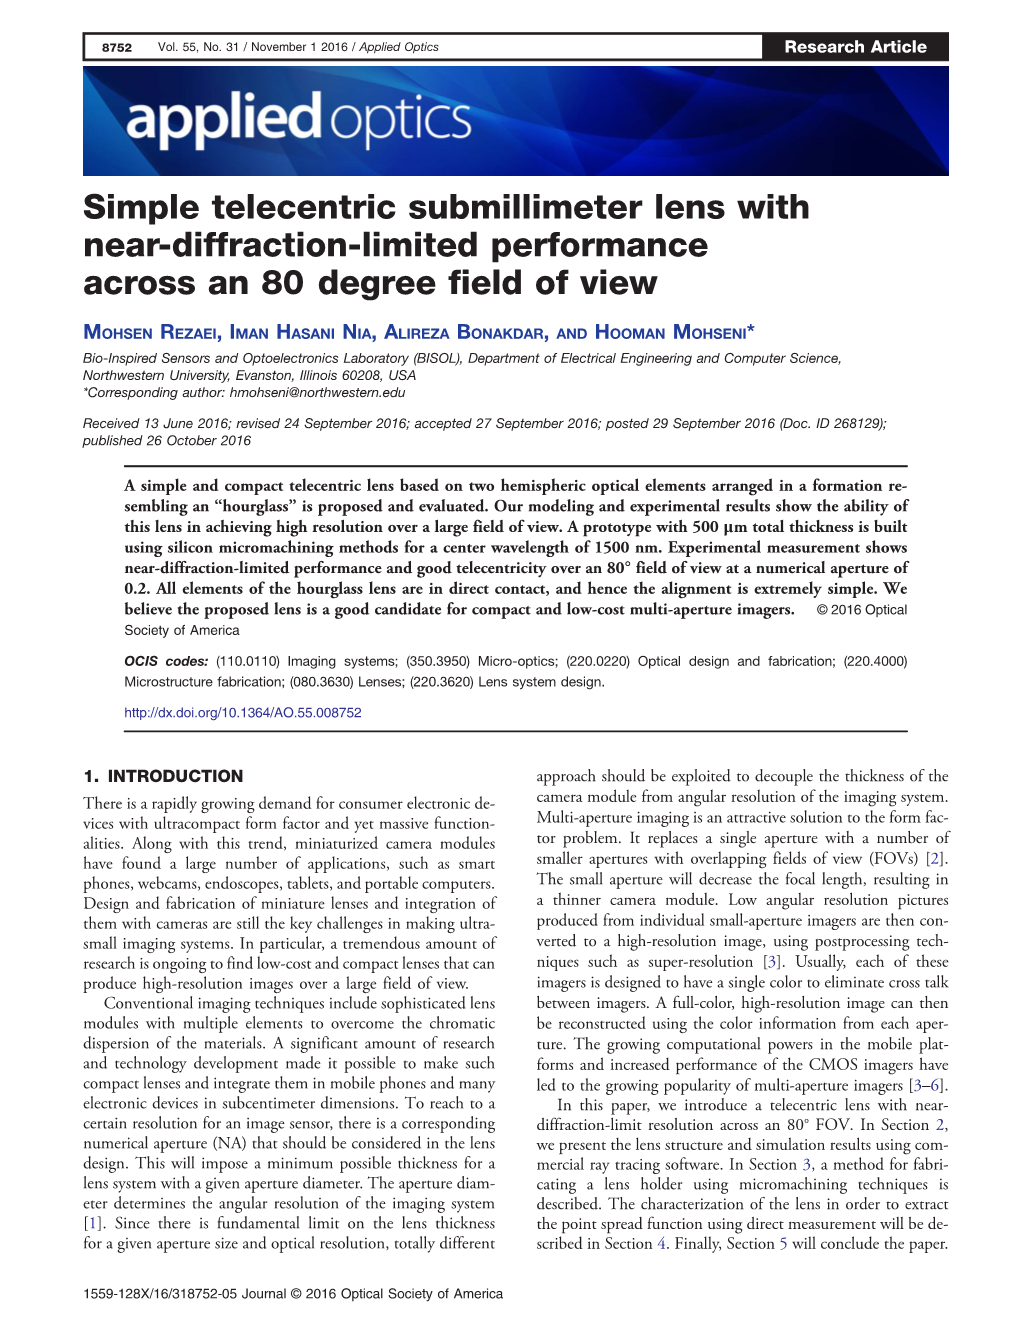 Simple Telecentric Submillimeter Lens with Near-Diffraction-Limited Performance Across an 80 Degree Field of View